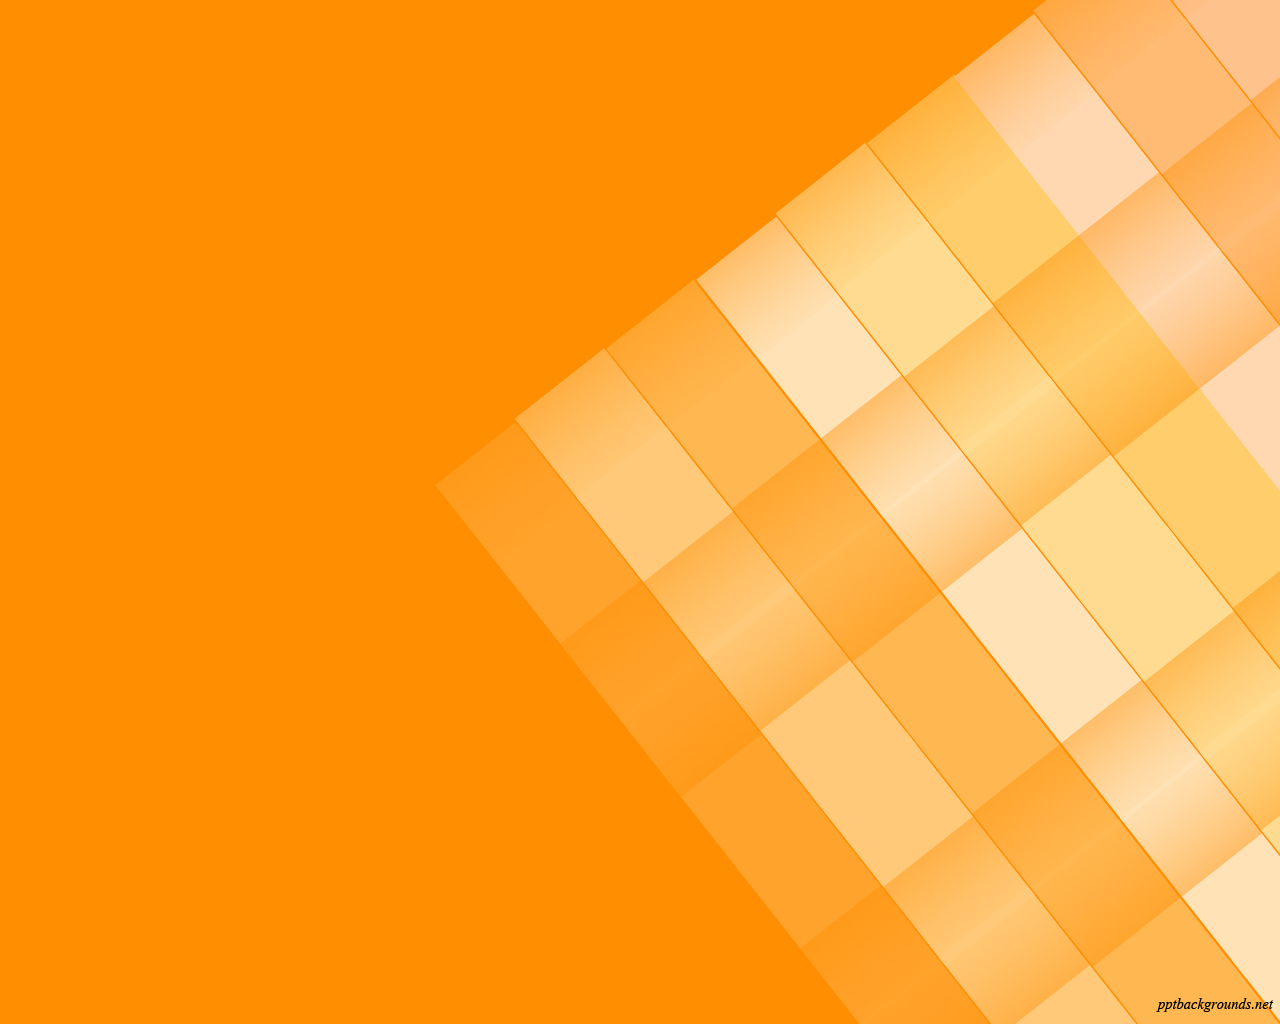 Abstract Orange Tiles Backgrounds For PowerPoint - Colors 